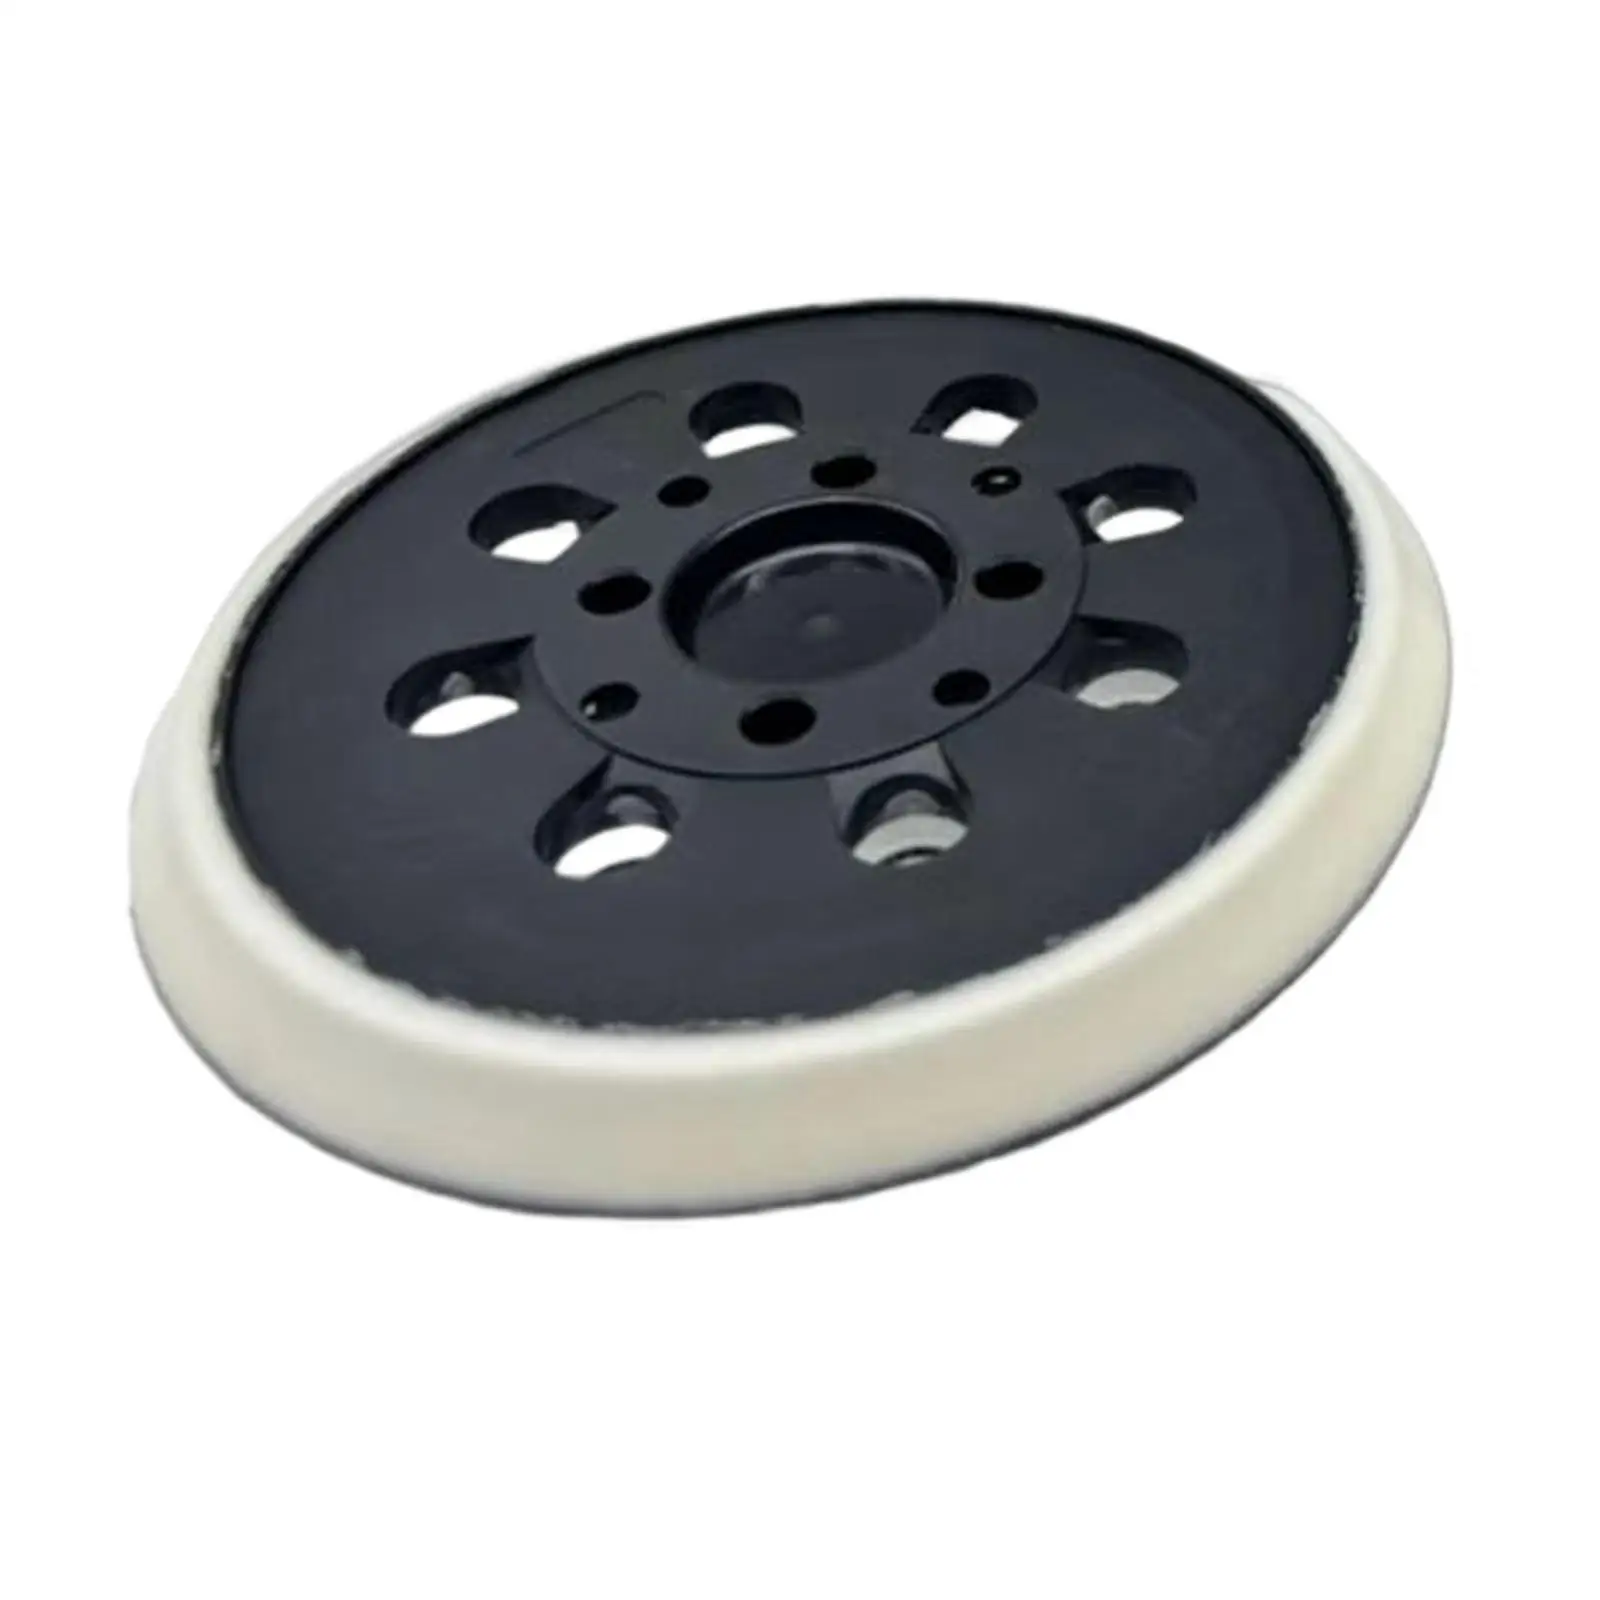 8 Holes Sanding Backing Plate Pad Self Adhesive Sander Polisher Tool 5inch for Wood